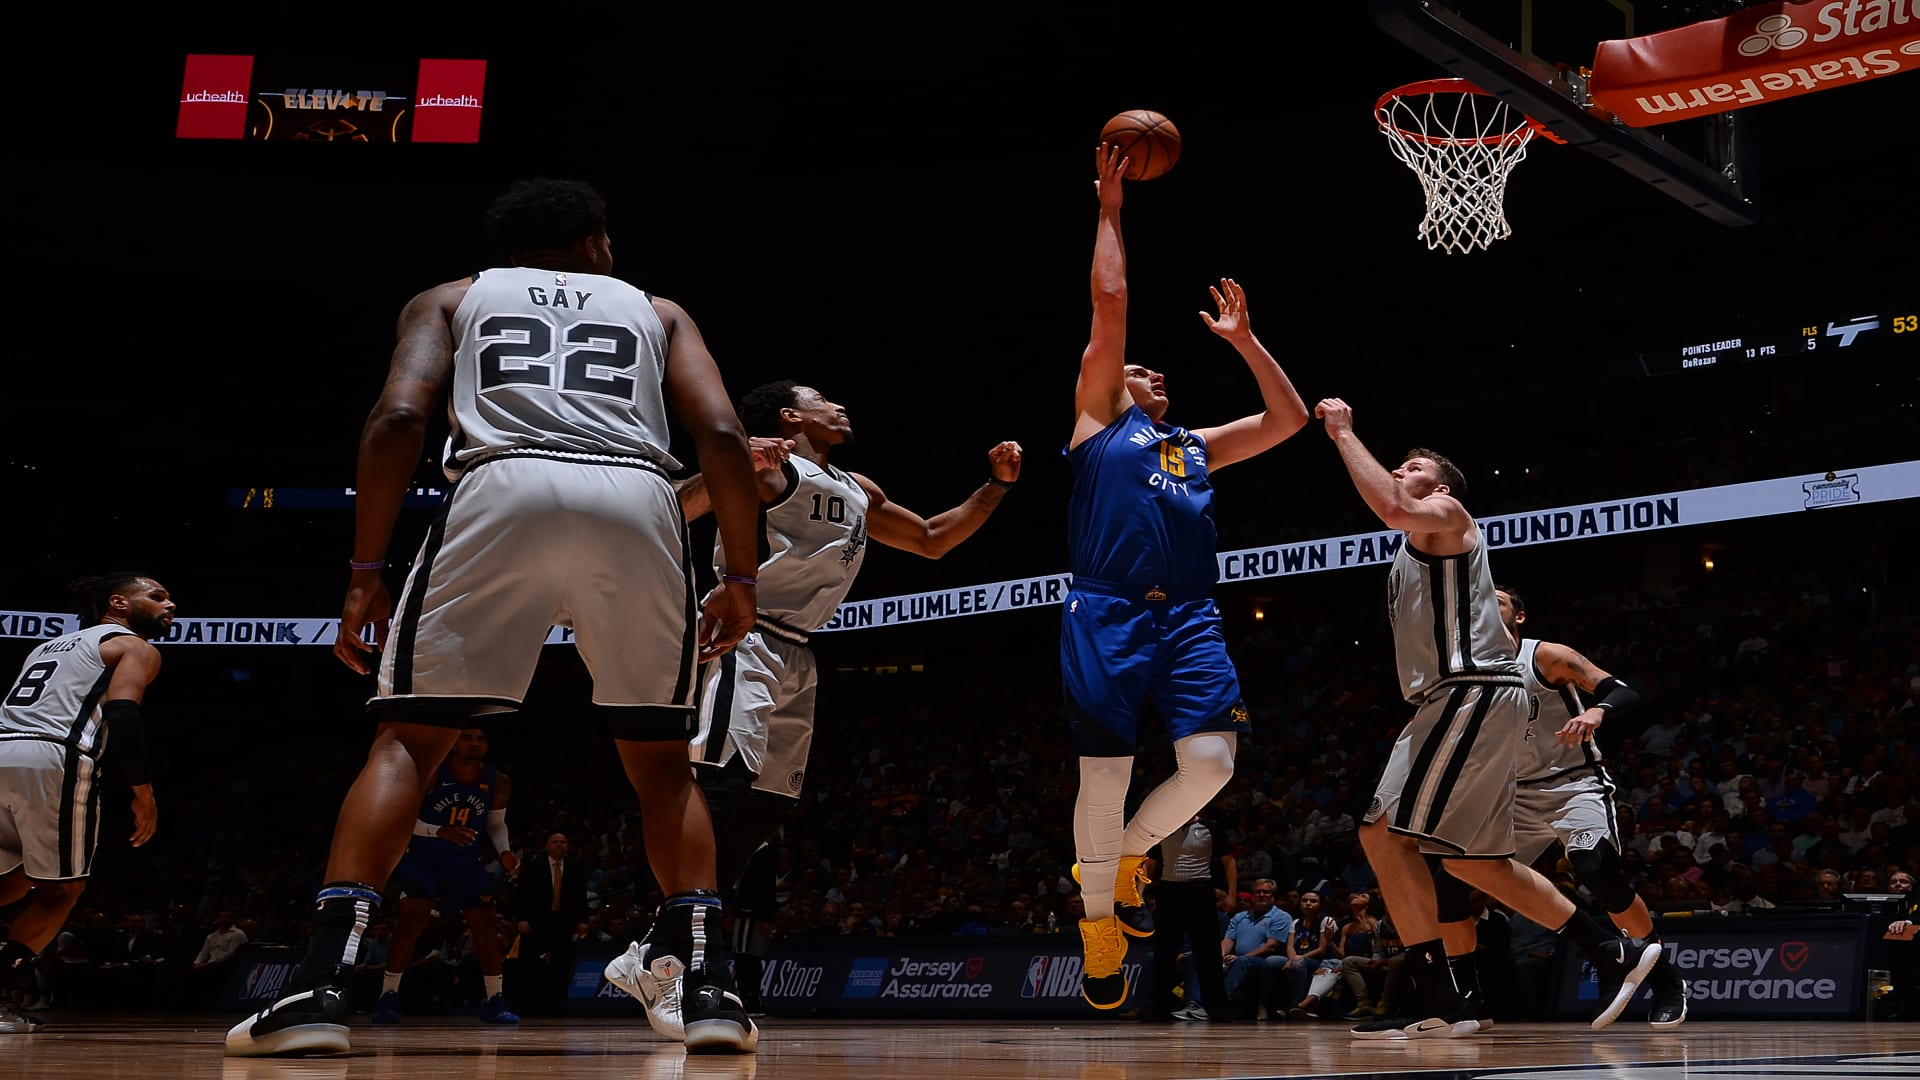 Nikola Jokic #15 of the Denver Nuggets shoots the ball during the game against the San Antonio Spurs during Game Five of Round One of the 2019 NBA Playoffs on April 23, 2019 at the Pepsi Center in Denver, Colorado.